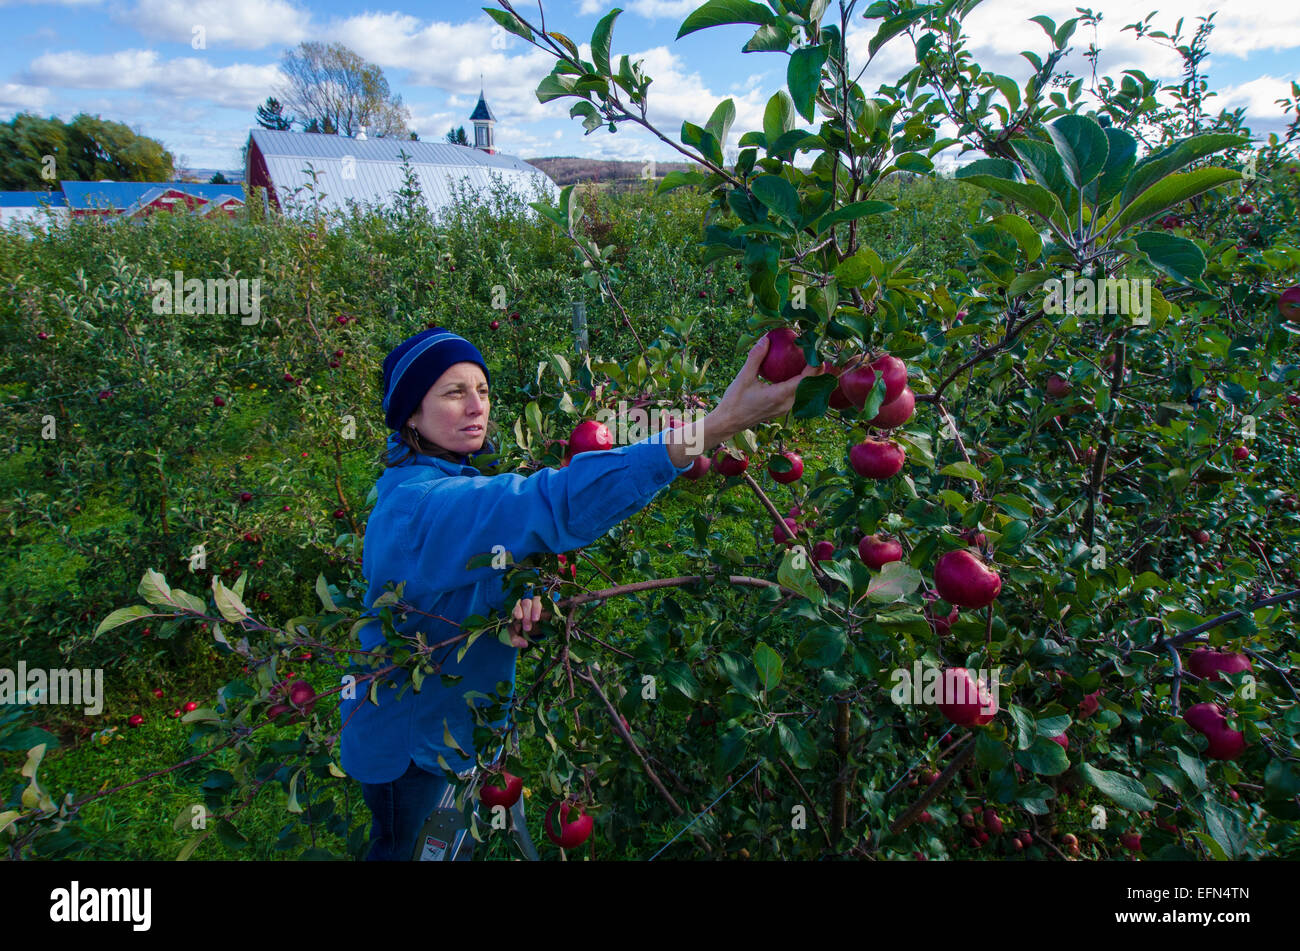 A picker climbs a ladder to pluck fresh fruit from an apple tree at an orchard in Lafeyette, New York. Stock Photo